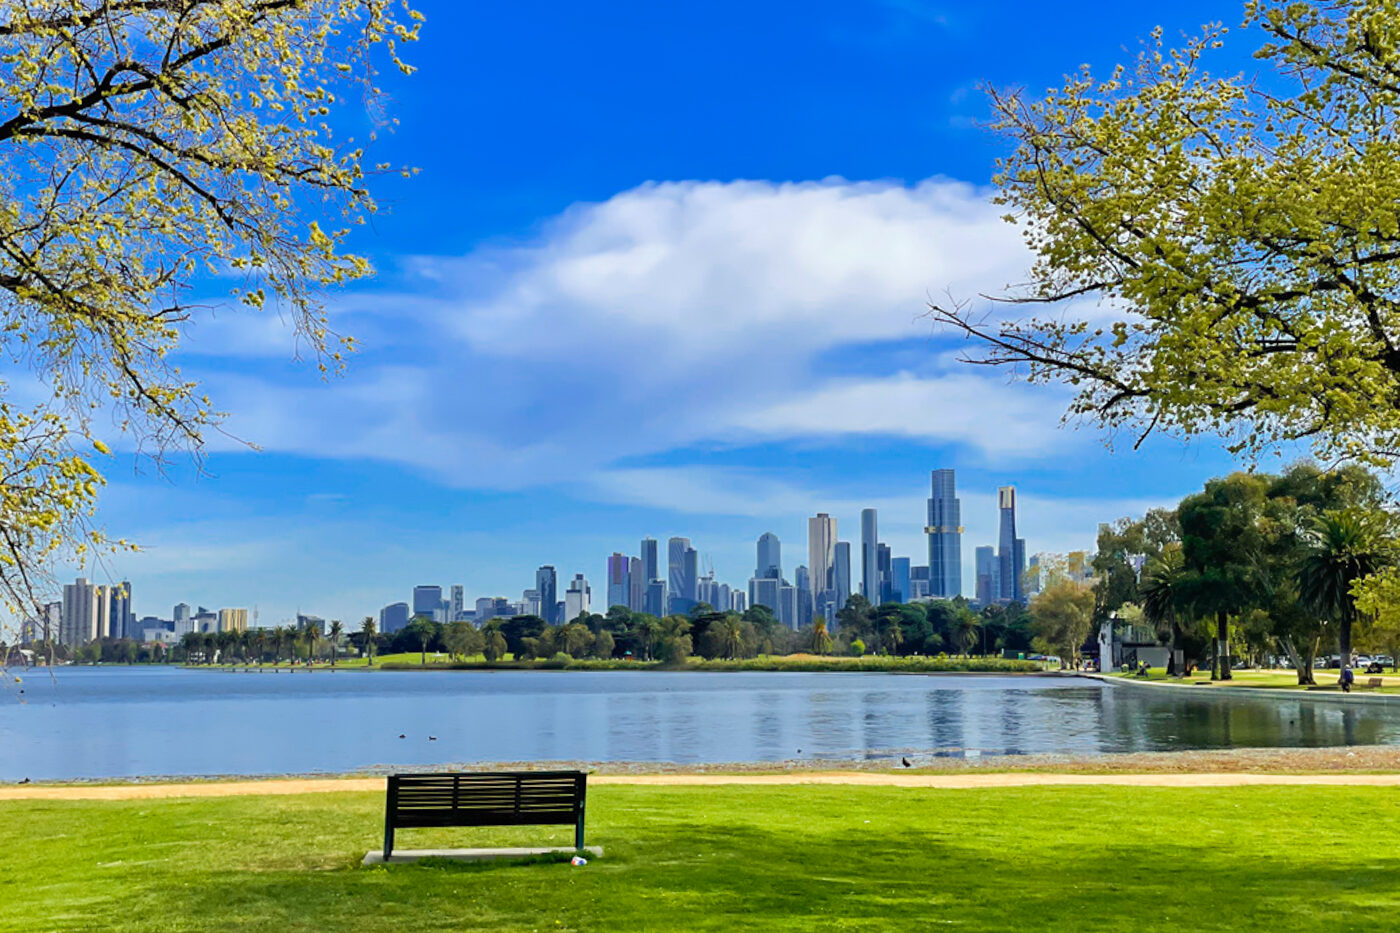 Albert Park's vast lake, with Melbourne's skyline appearing in the distance. In the foreground, an empty bench lines the walking trail that encompasses the water.